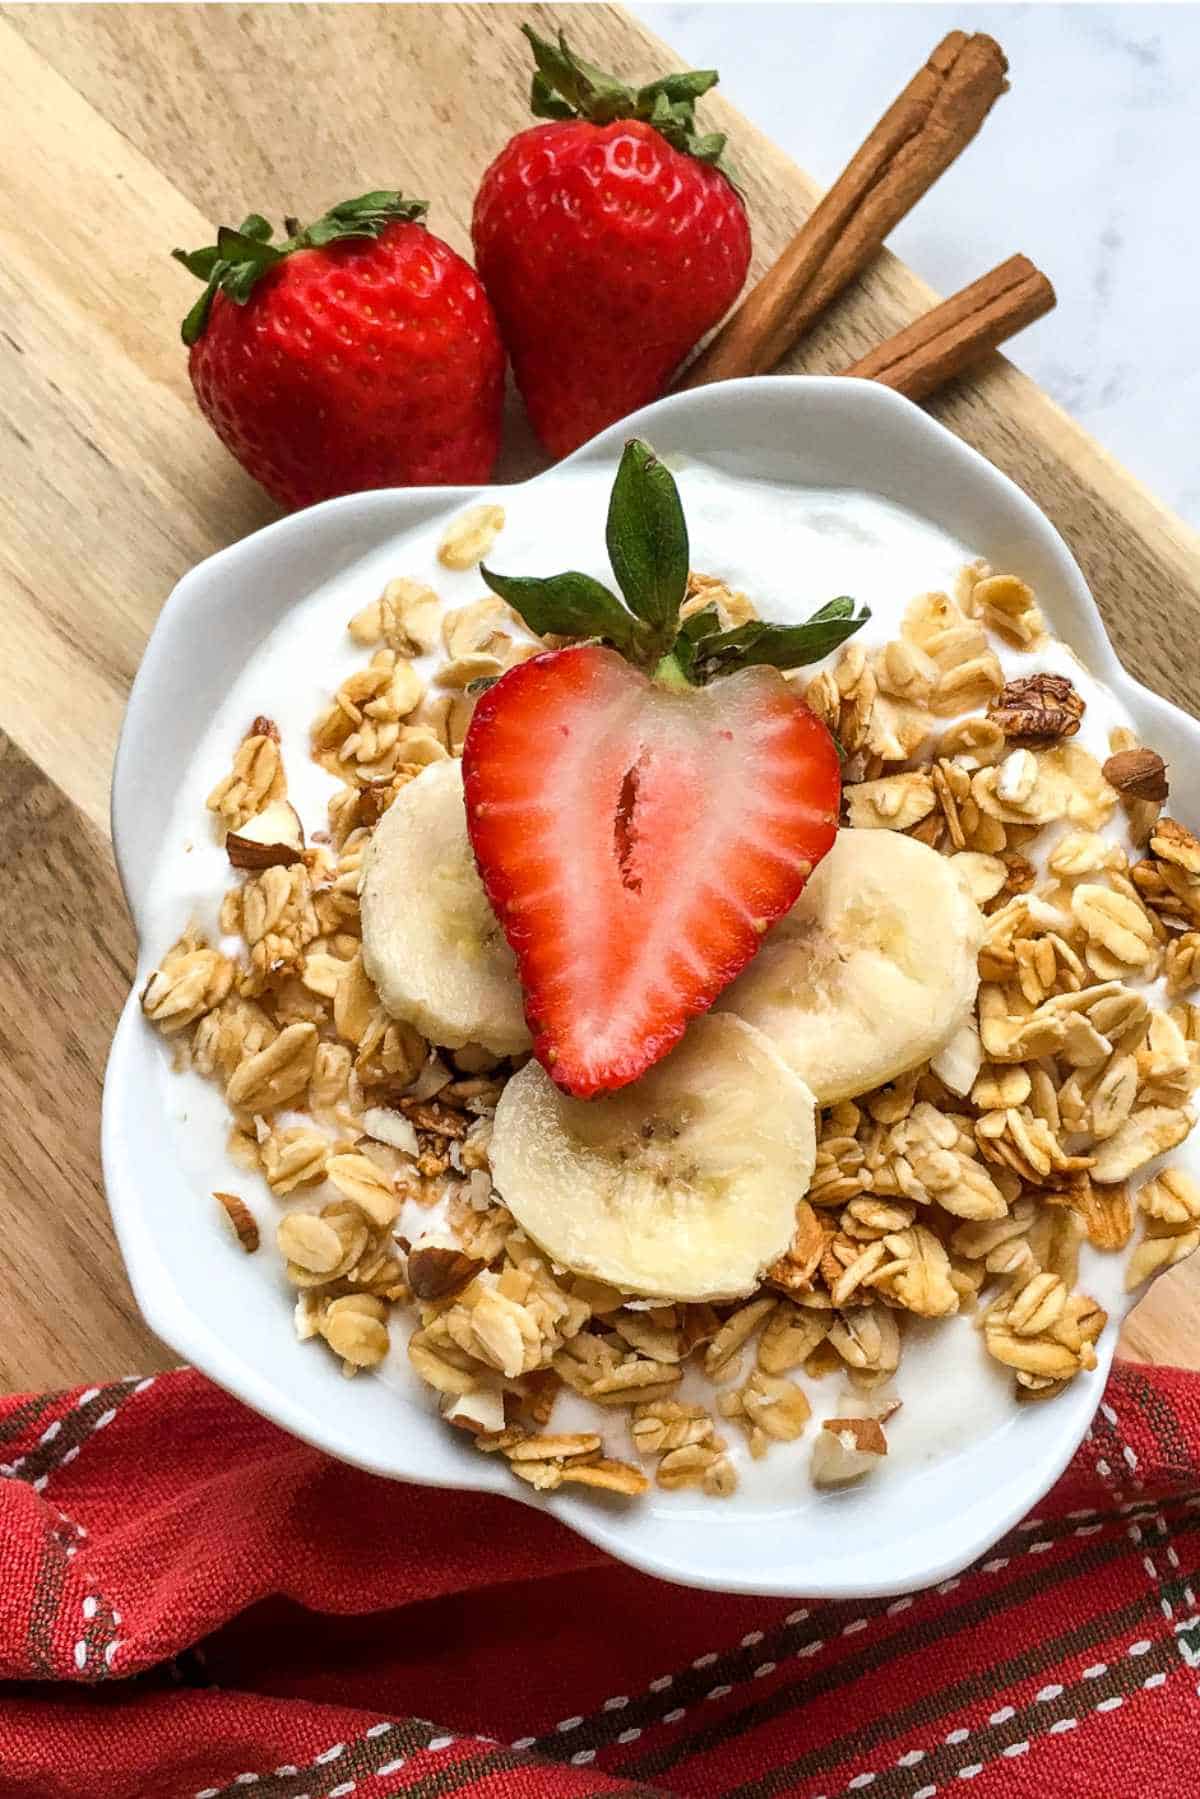 white lotus bowl full of lactose free yogurt with granola and sliced strawberries on a wood board